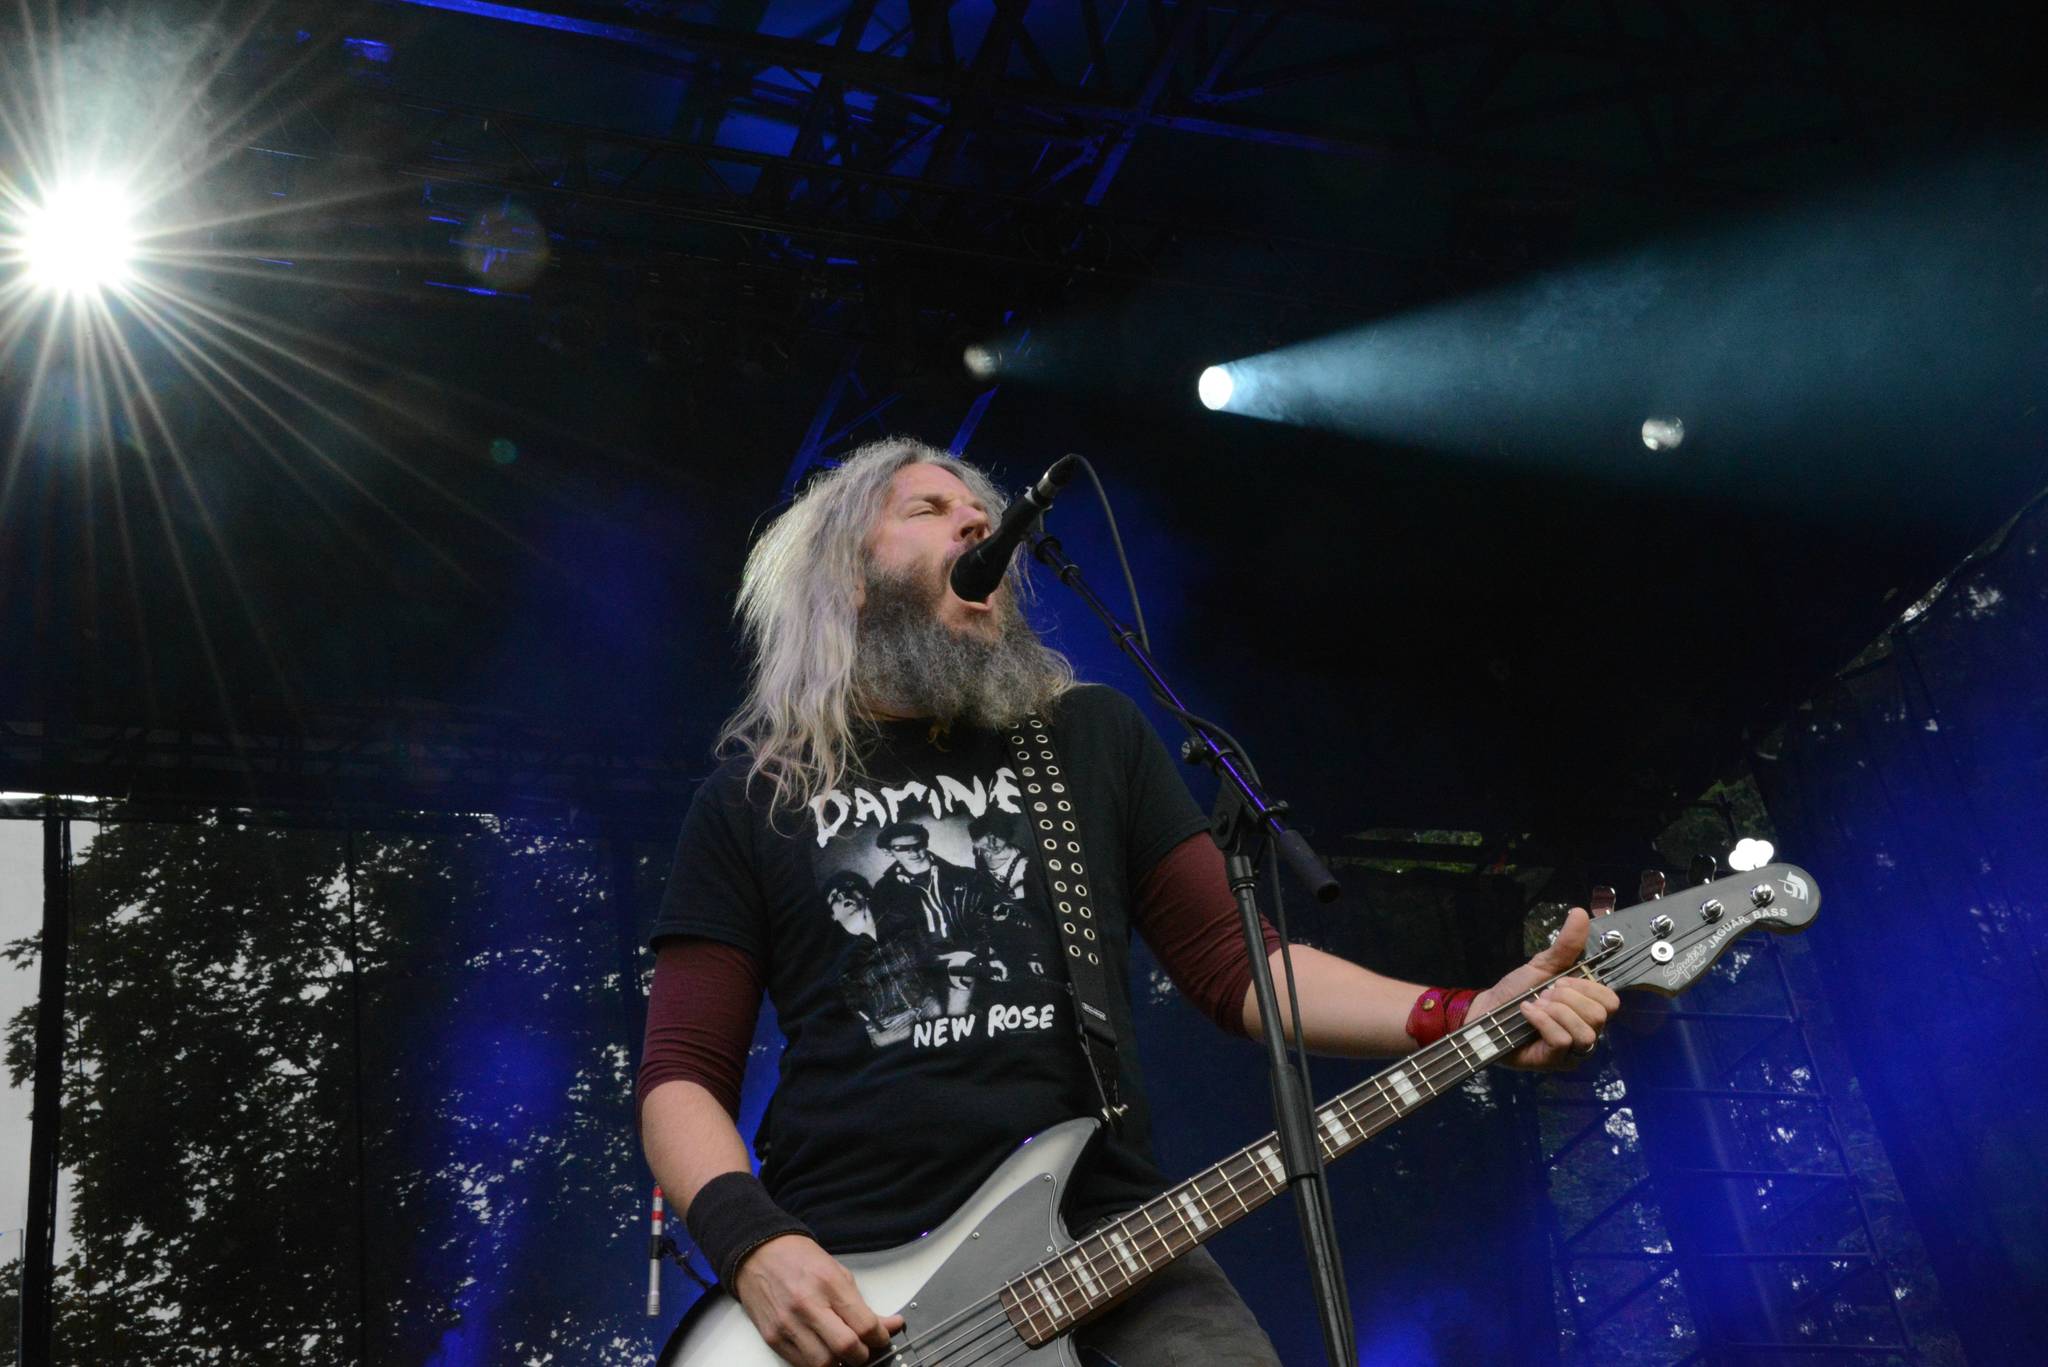 Mastodon bassist Troy Sanders lifts the crowd with his soaring, melodic vocals. Photo courtesy of Cat Rose